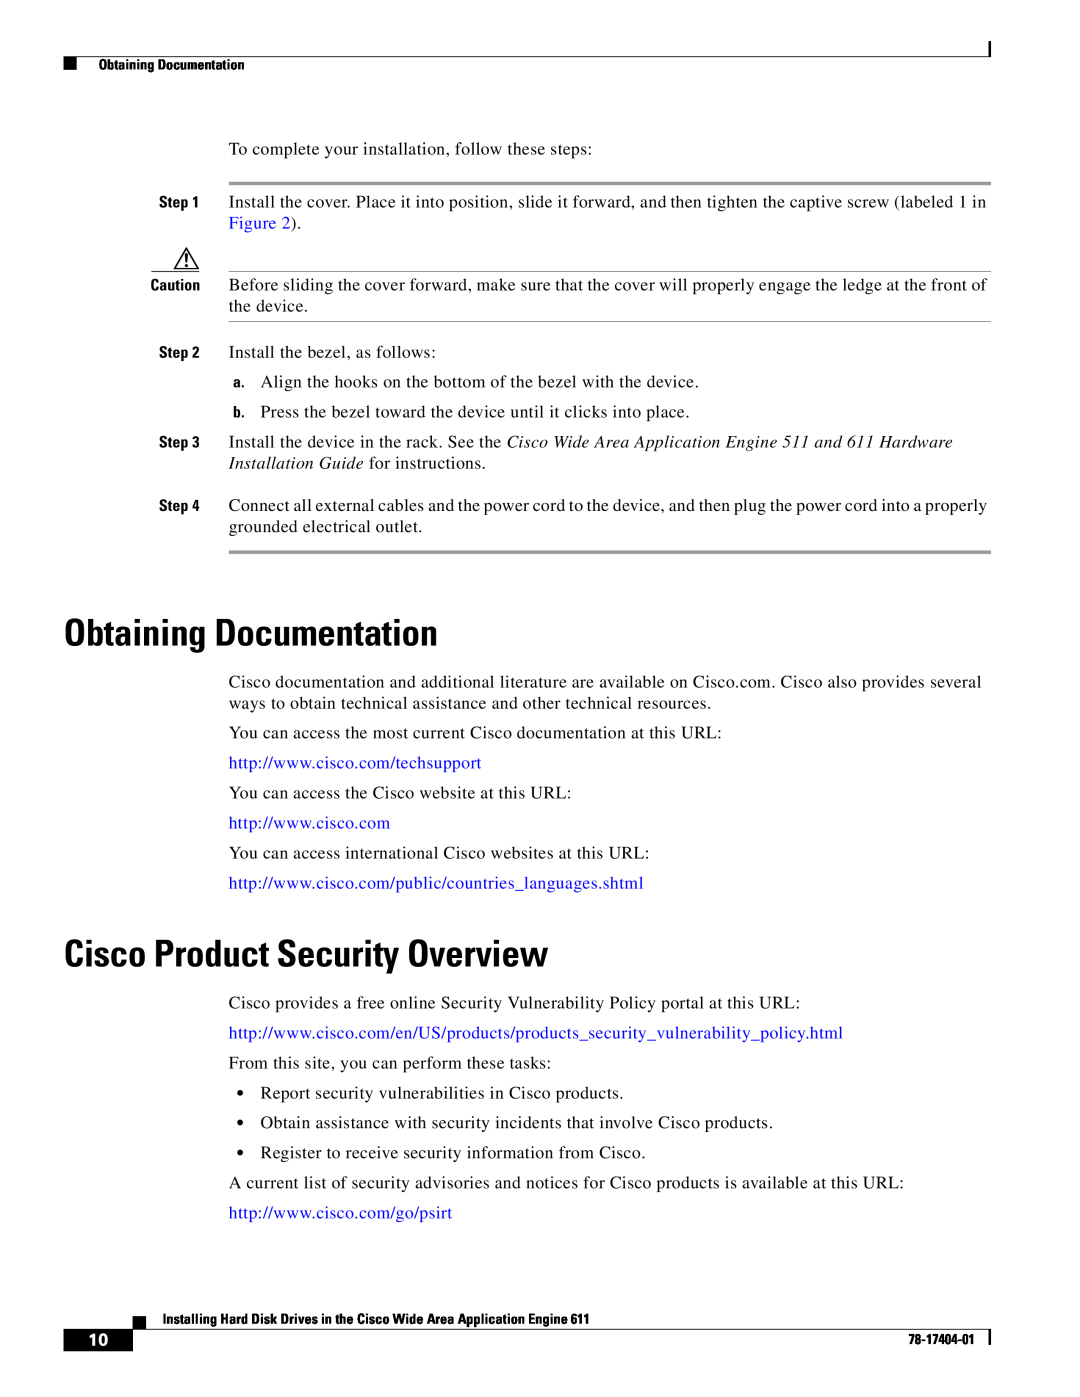 Cisco Systems Engine 611 manual Obtaining Documentation, Cisco Product Security Overview 